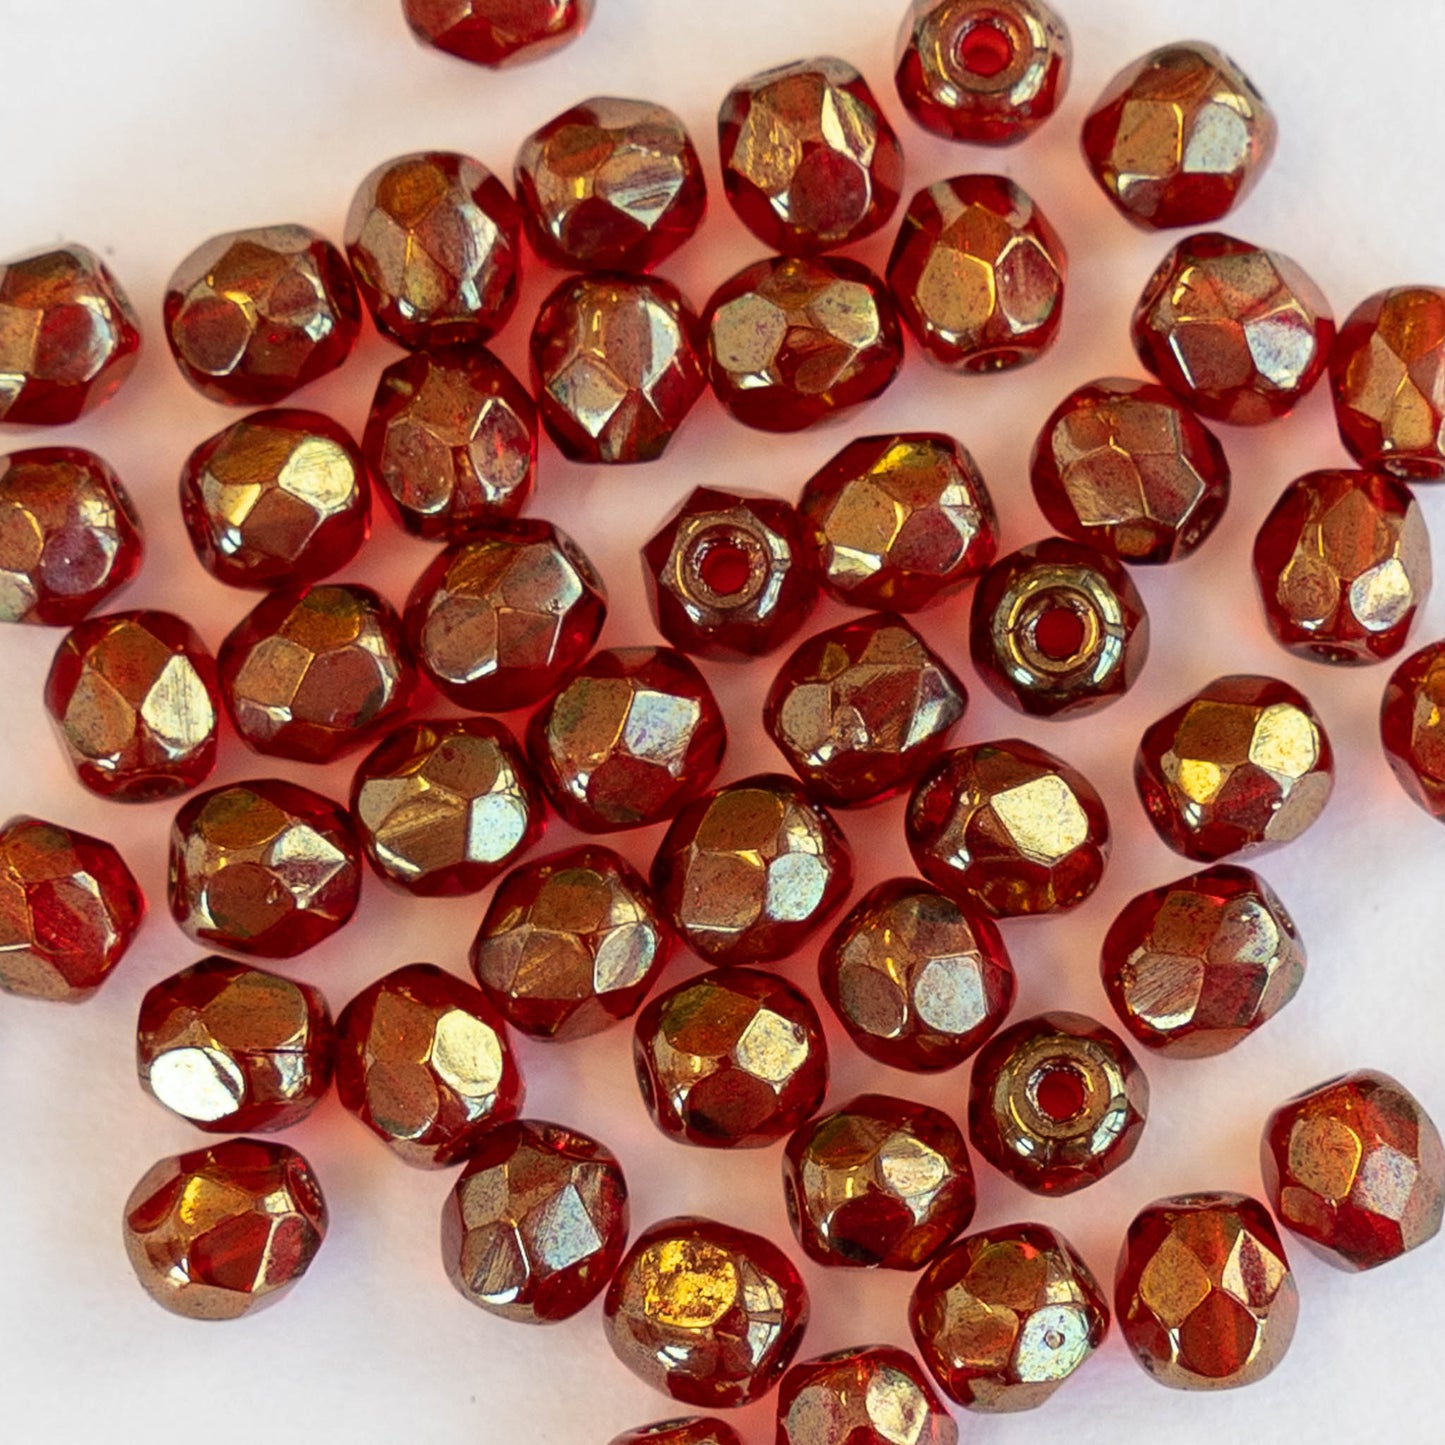 4mm Round Firepolished Beads - Red Gold Luster - 50 Beads